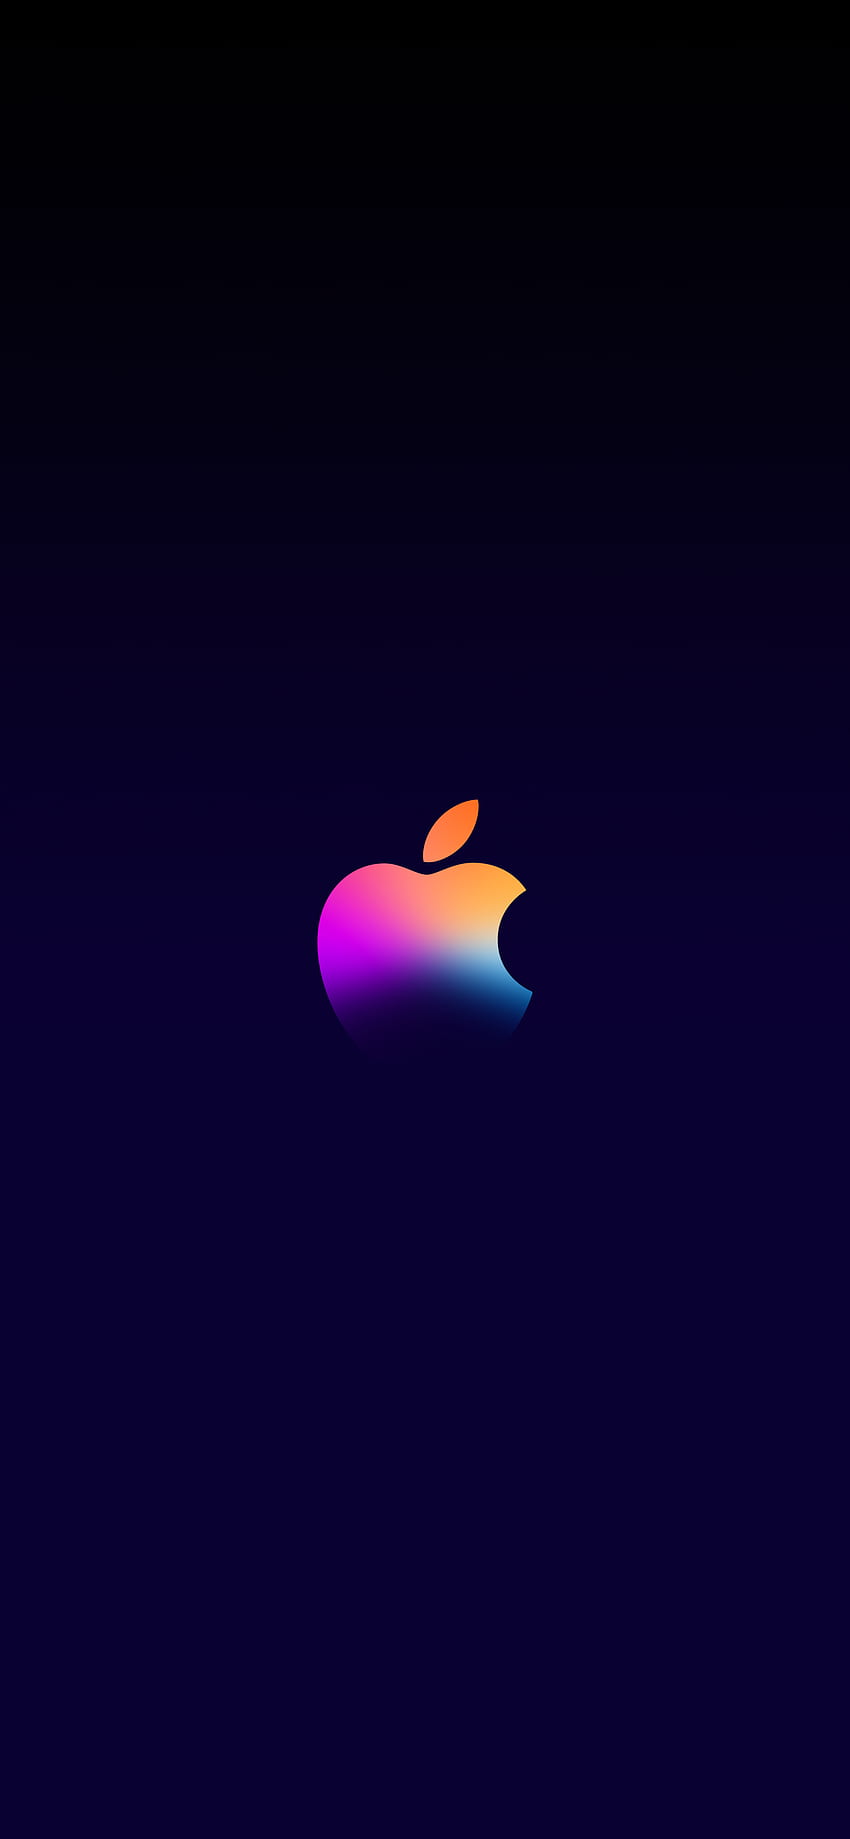 Evento Apple One More Thing - Centrale nel 2021. Logo Apple iphone, Apple iphone, Apple Sfondo del telefono HD